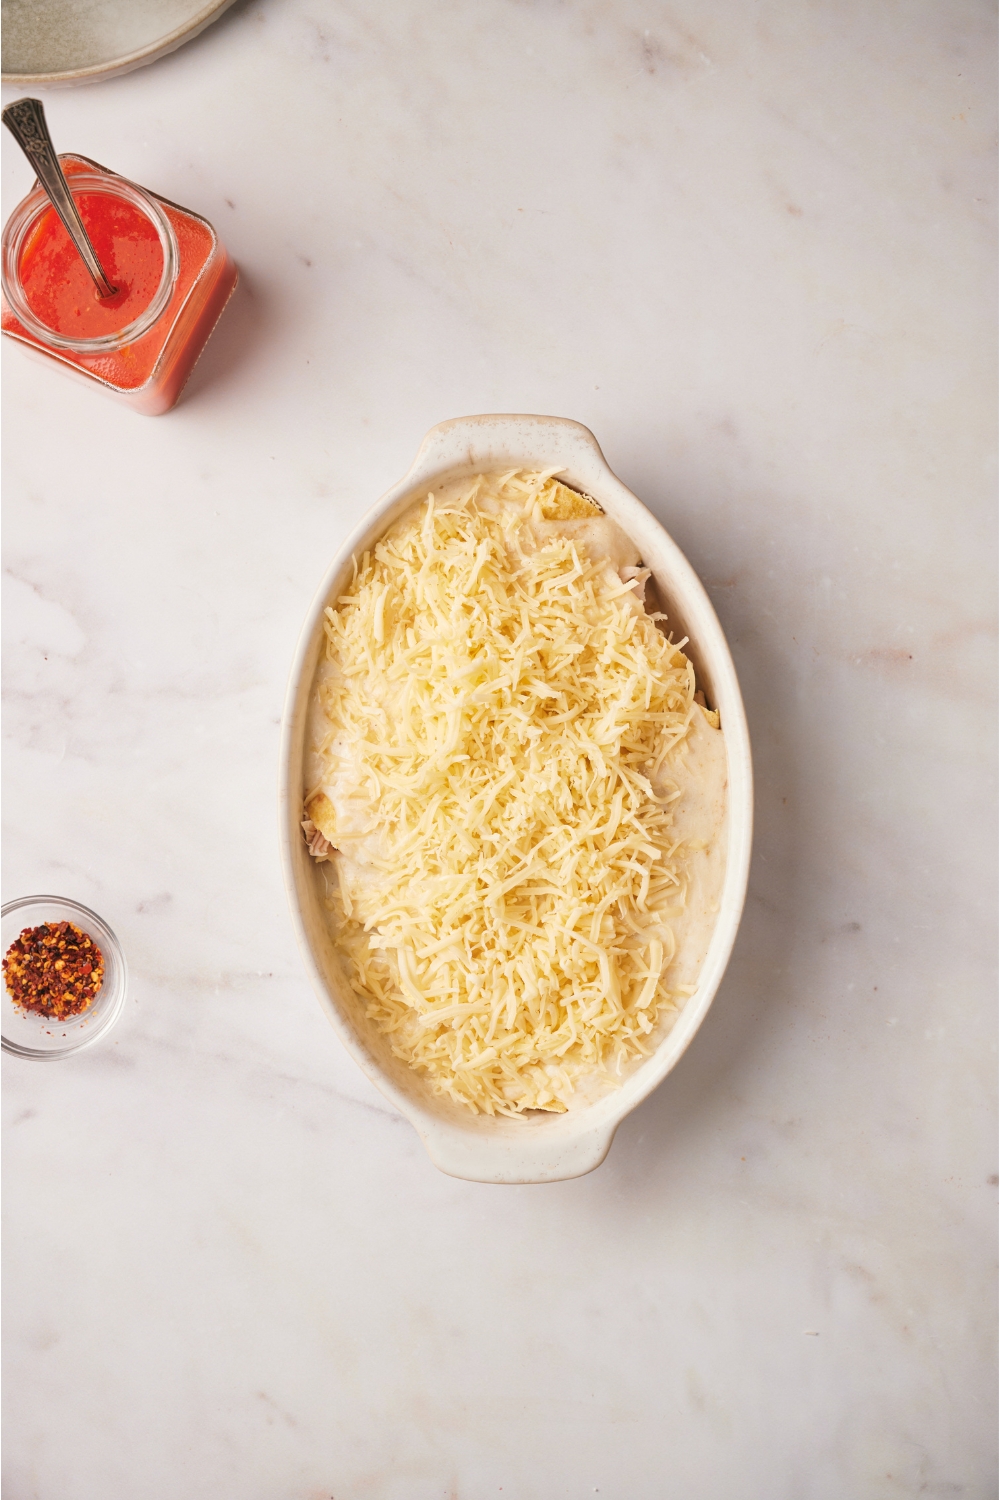 A baking dish filled with unbaked chicken enchiladas covered in shredded cheese.